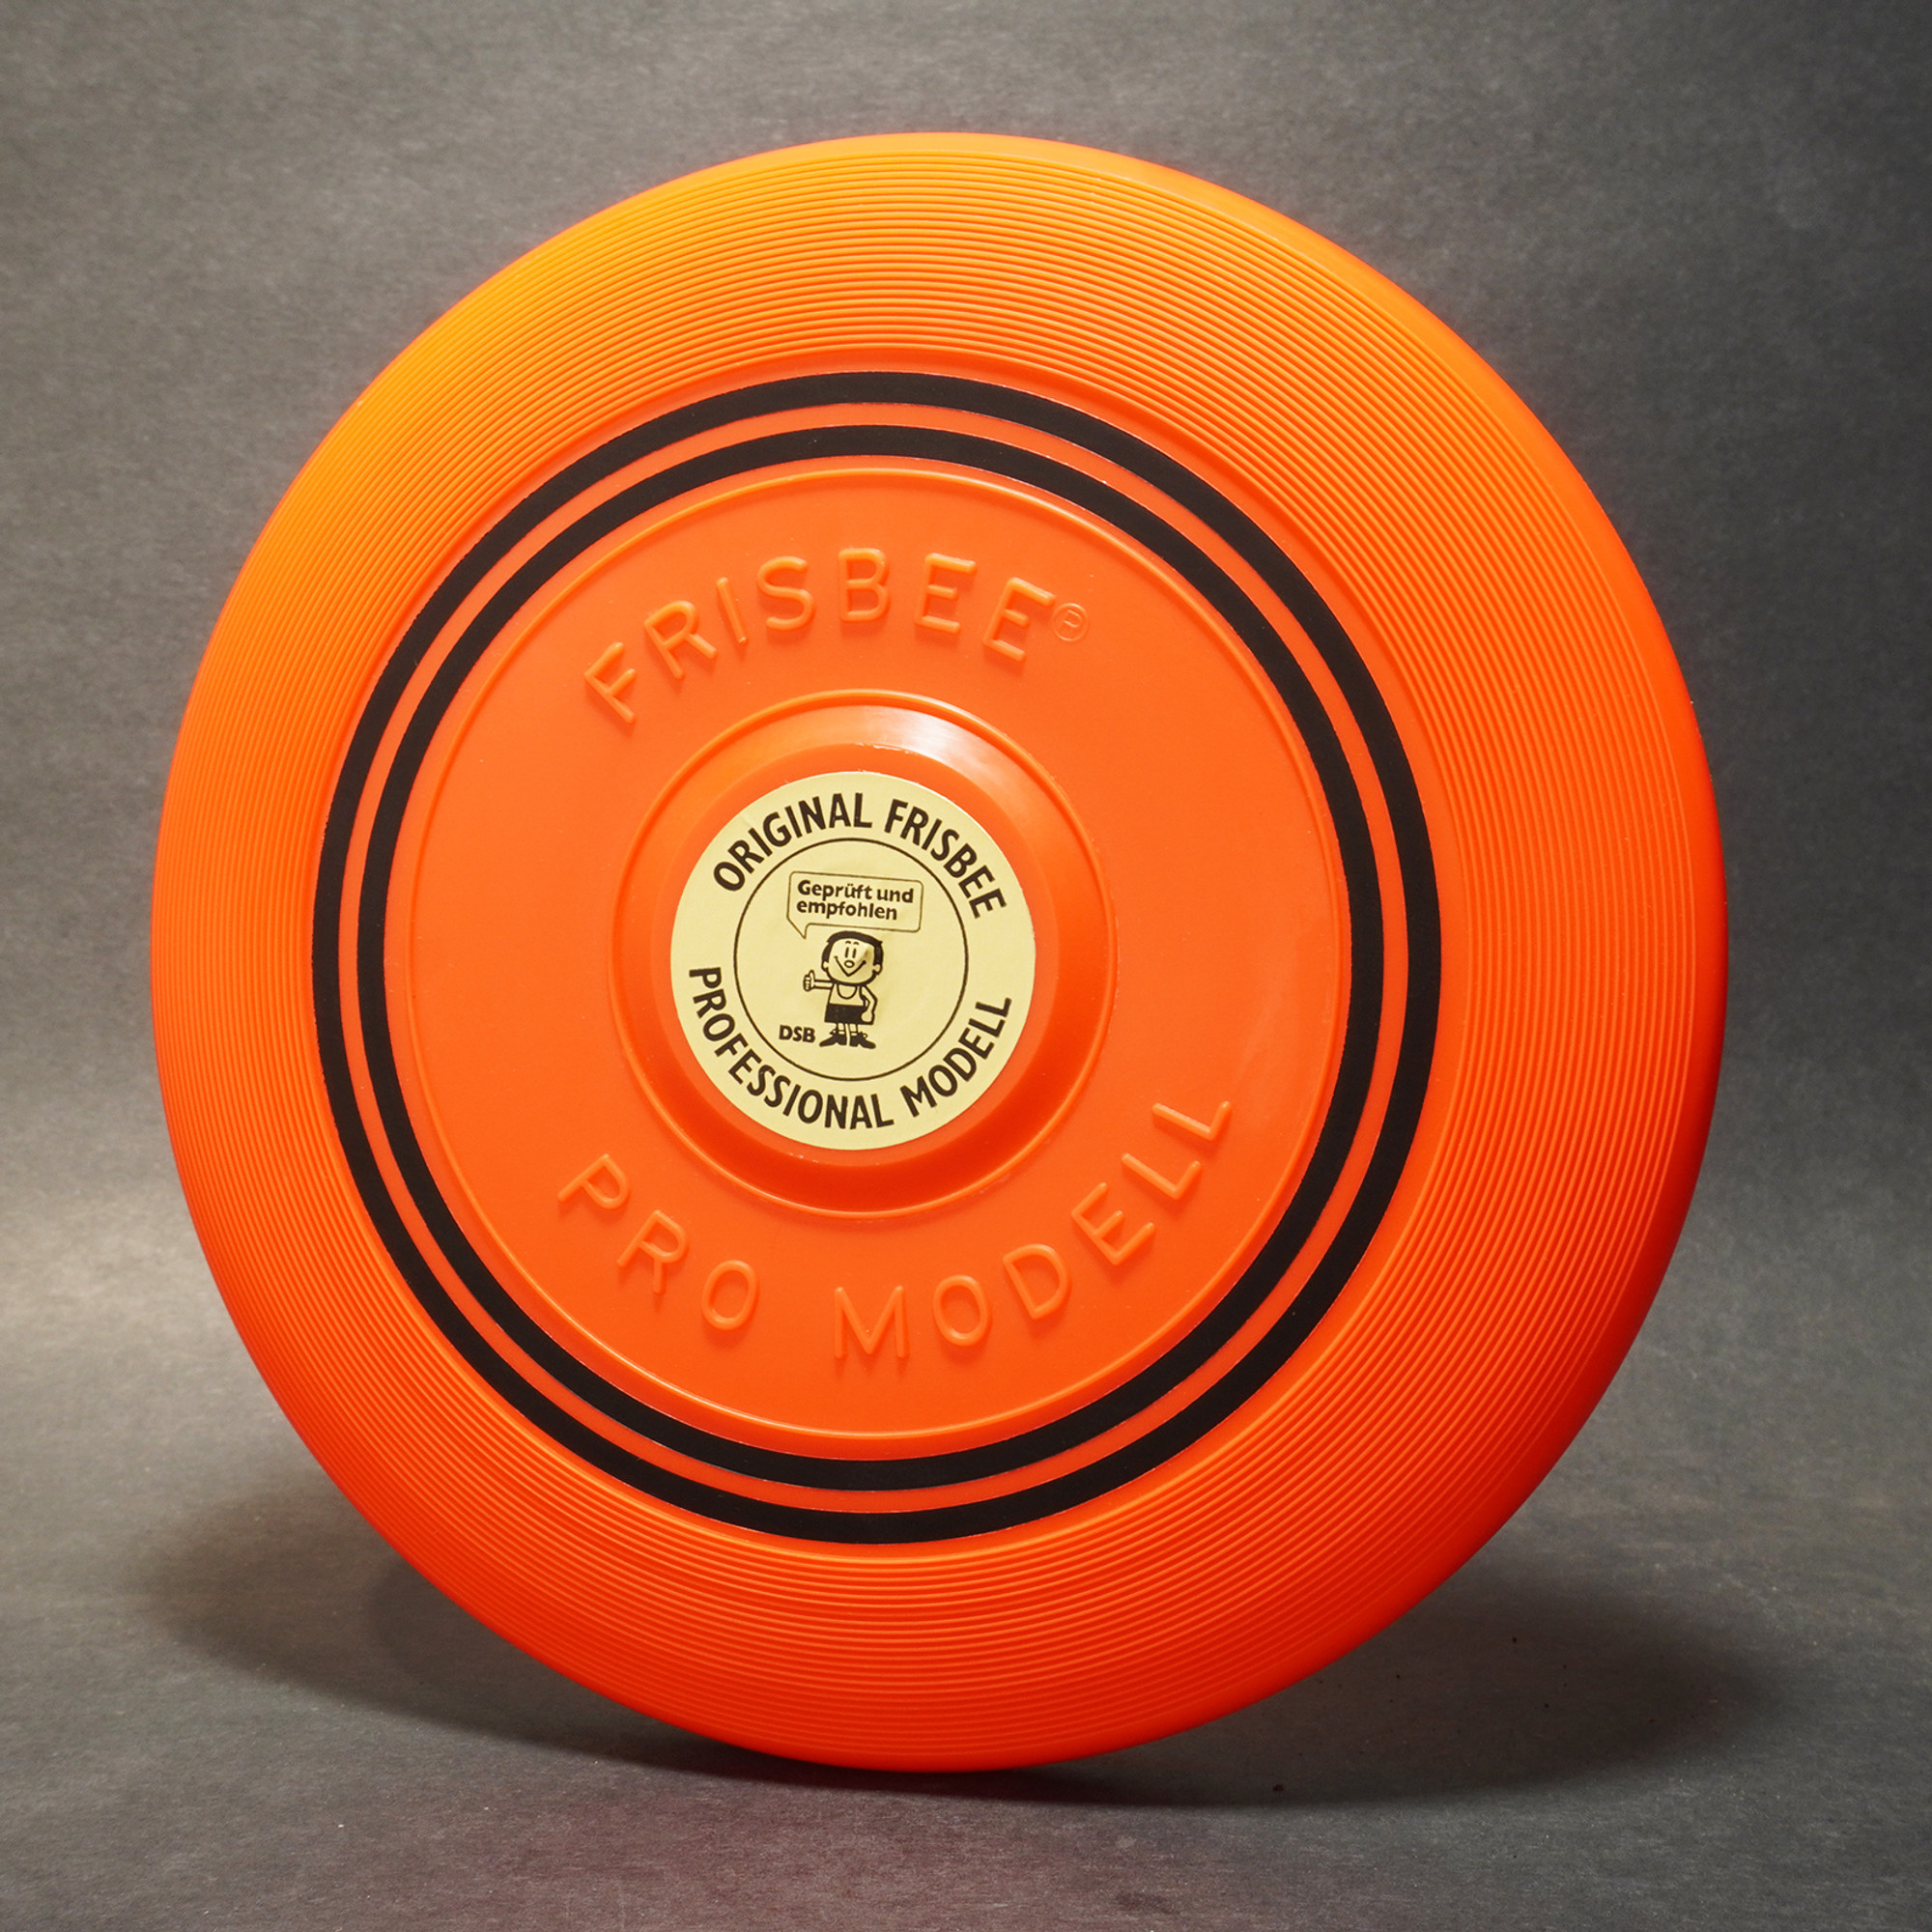 Wham-O Licensed Raised Letter Professional Model Frisbee Germany - THE WRIGHT LIFE ACTION SPORTING GOODS STORE